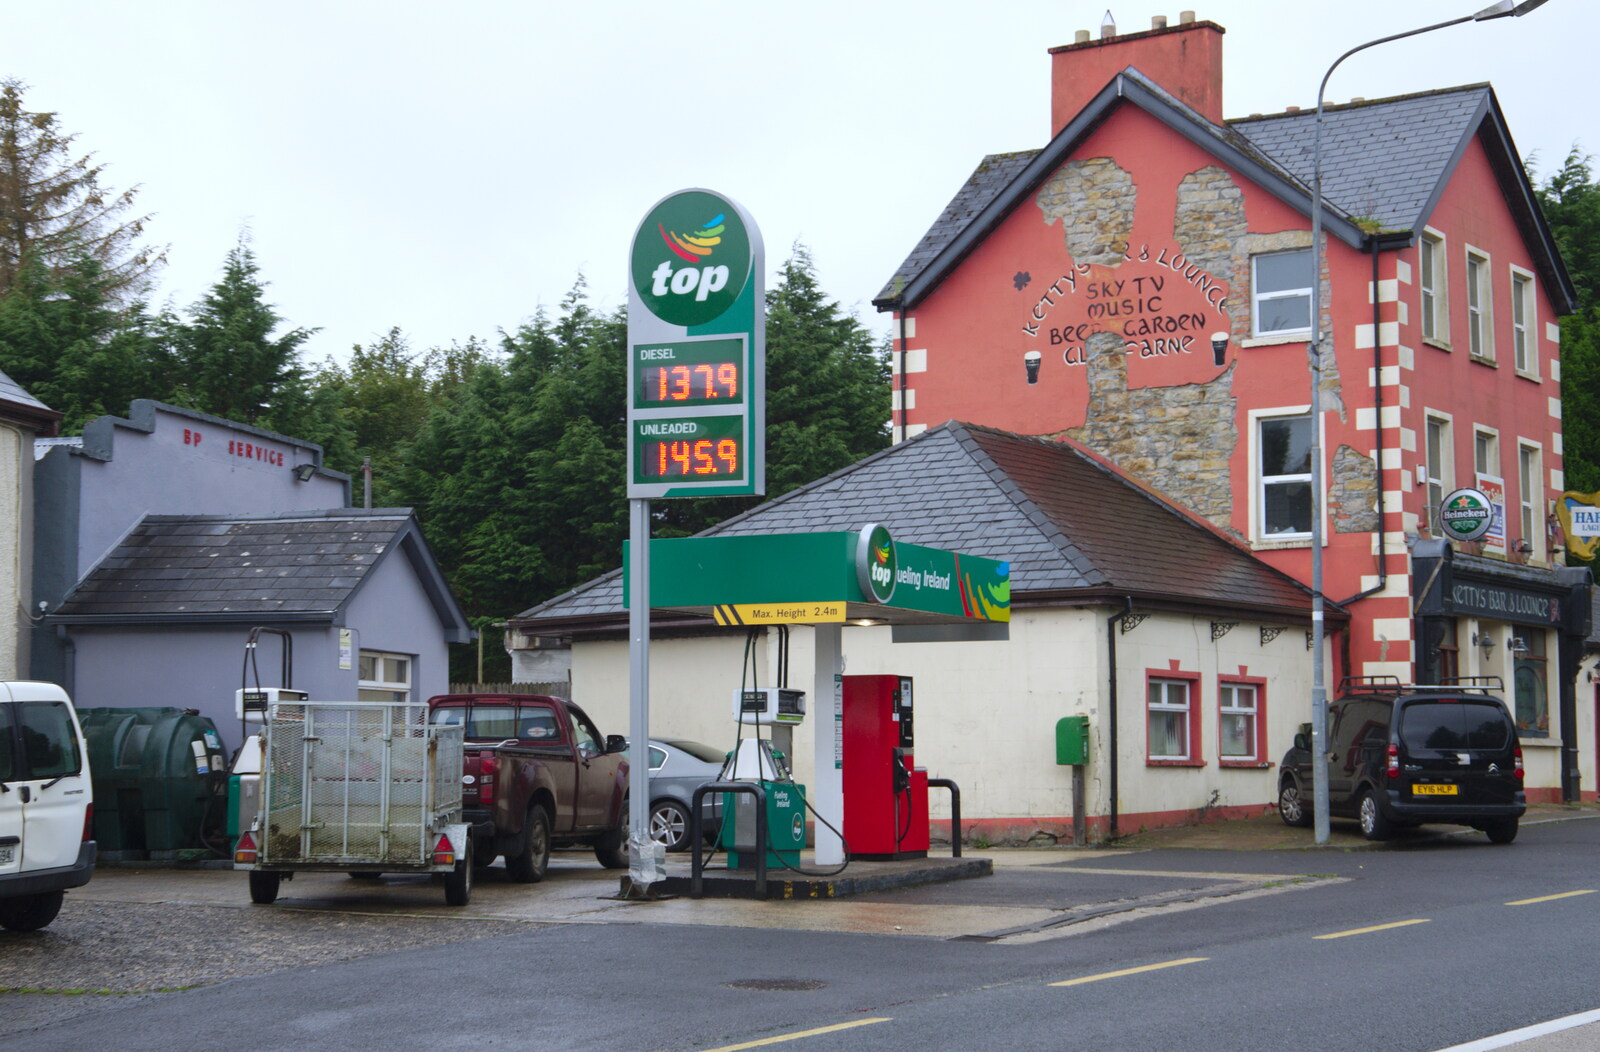 The petrol station in Glenfarne from Travels in the Borderlands: An Blaic/Blacklion to Belcoo and back, Cavan and Fermanagh, Ireland - 22nd August 2019